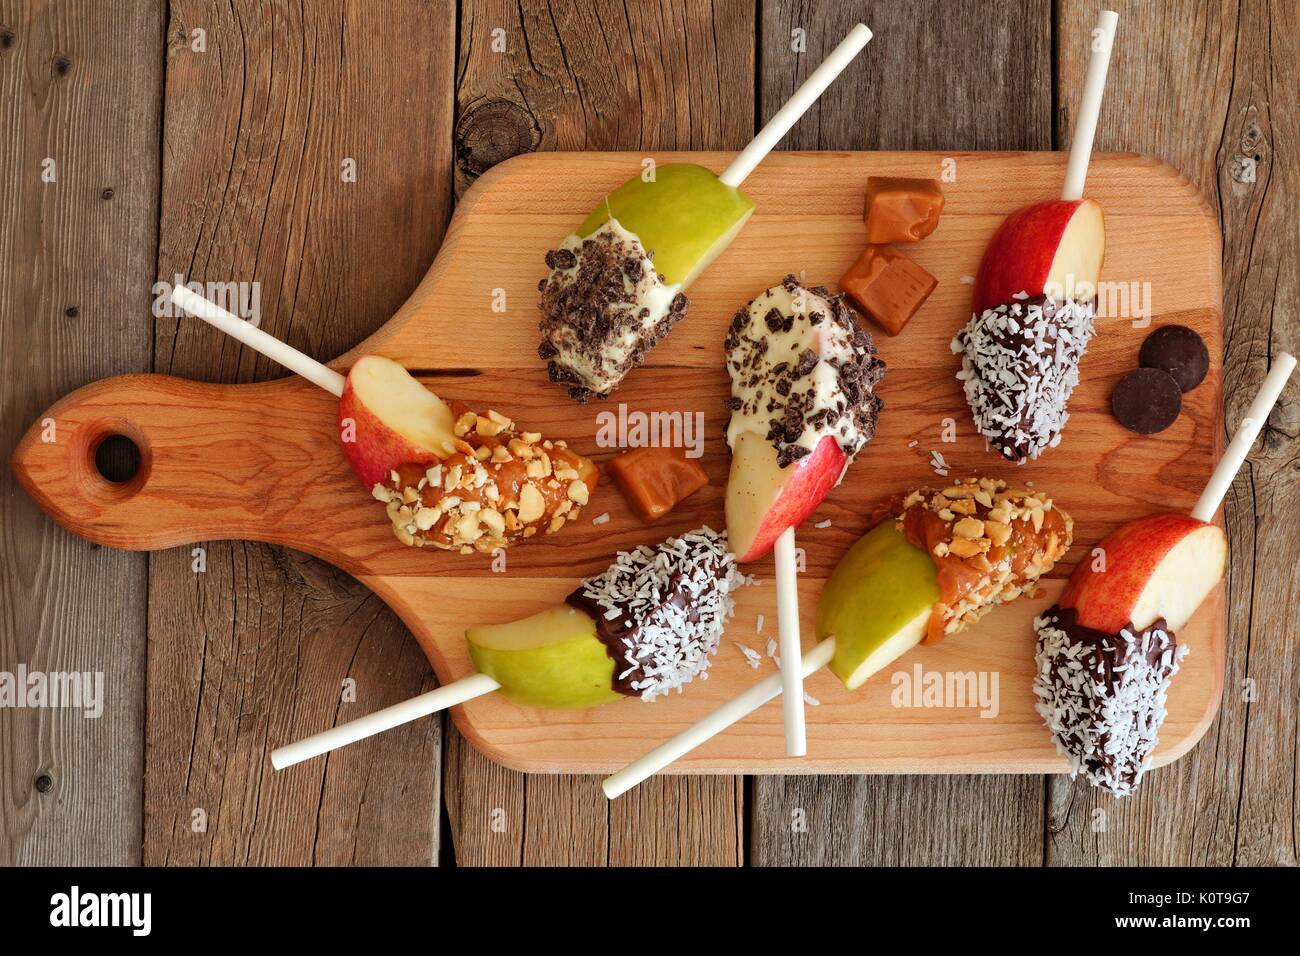 Caramel and chocolate dipped apple slices on a paddle board with rustic wooden background Stock Photo